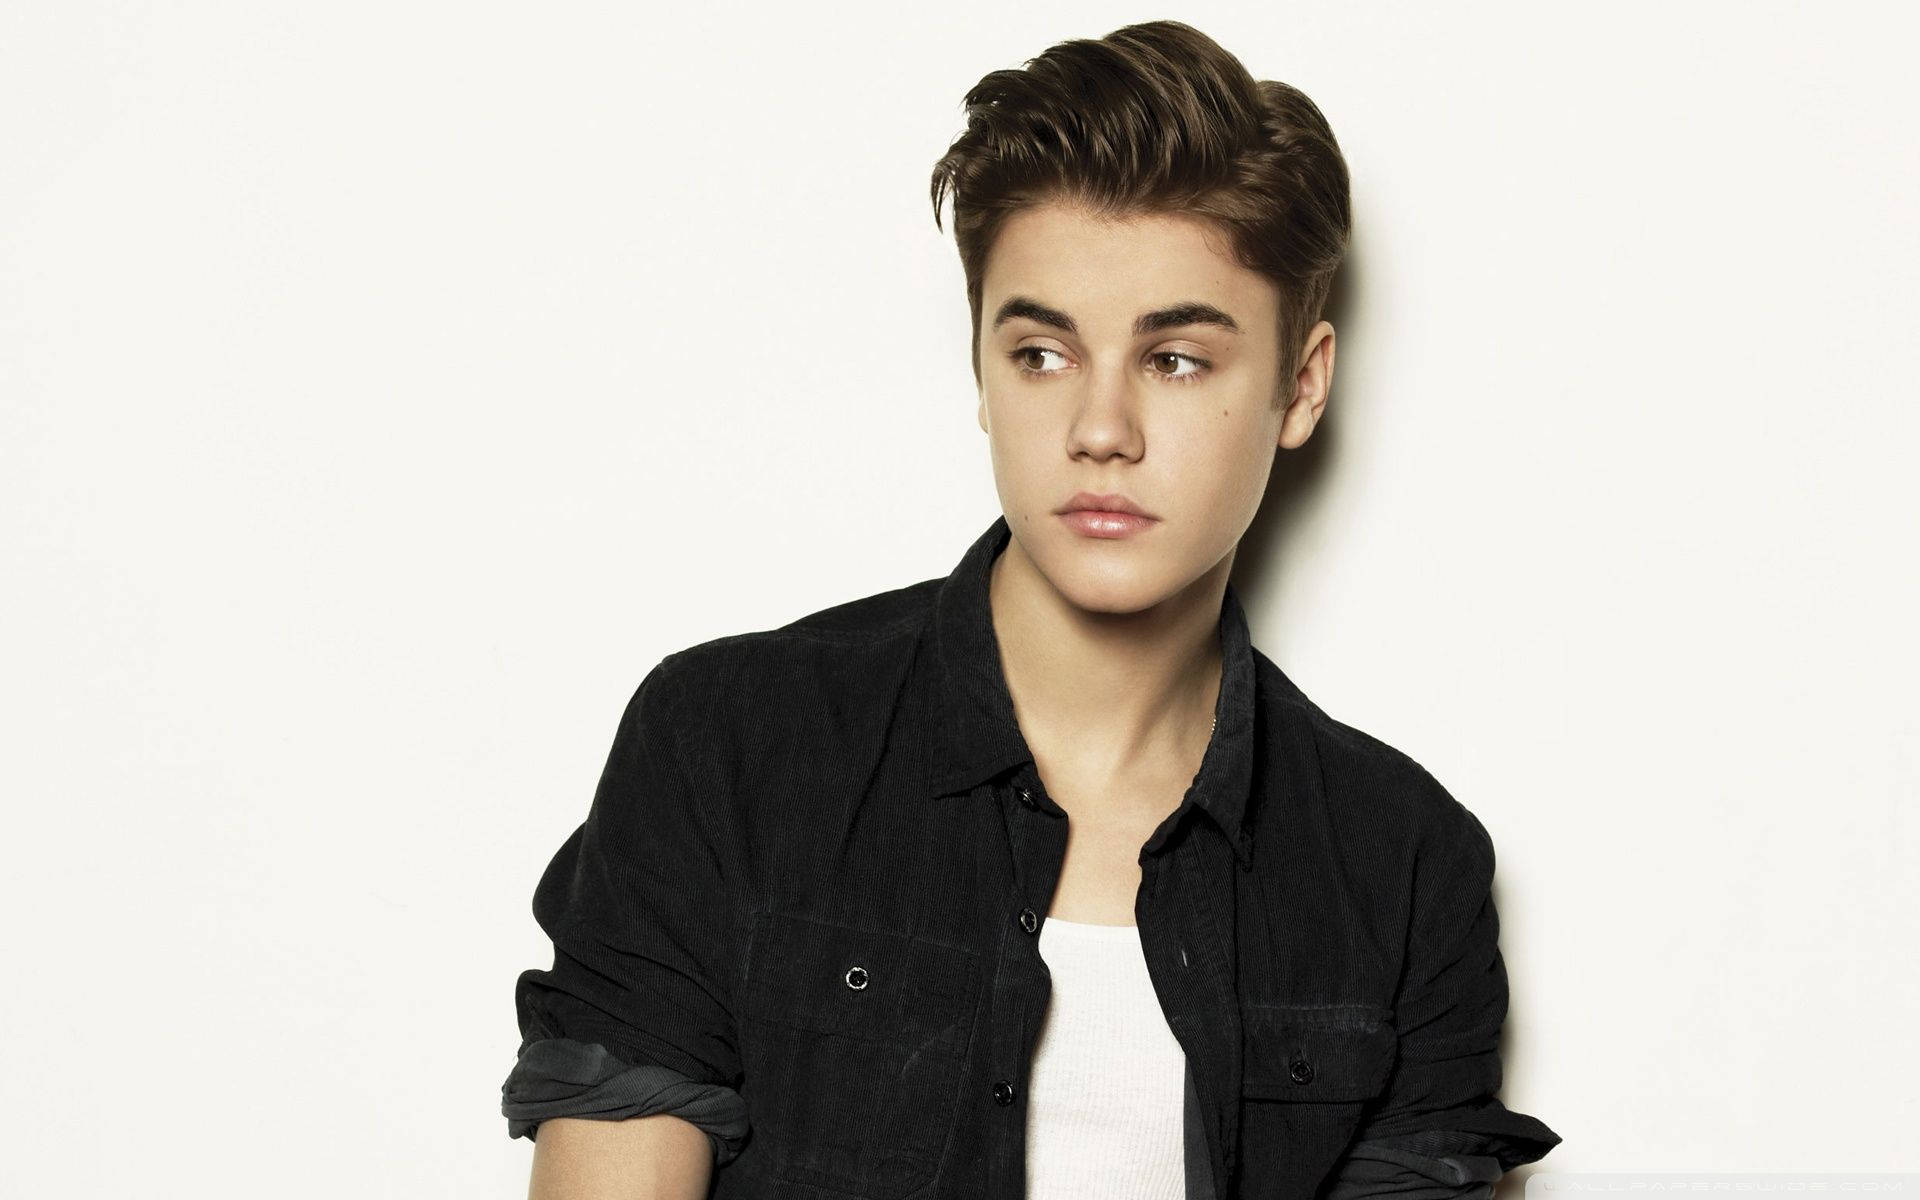 Justin Bieber on the Cover of His Hit Single 'Boyfriend' Wallpaper